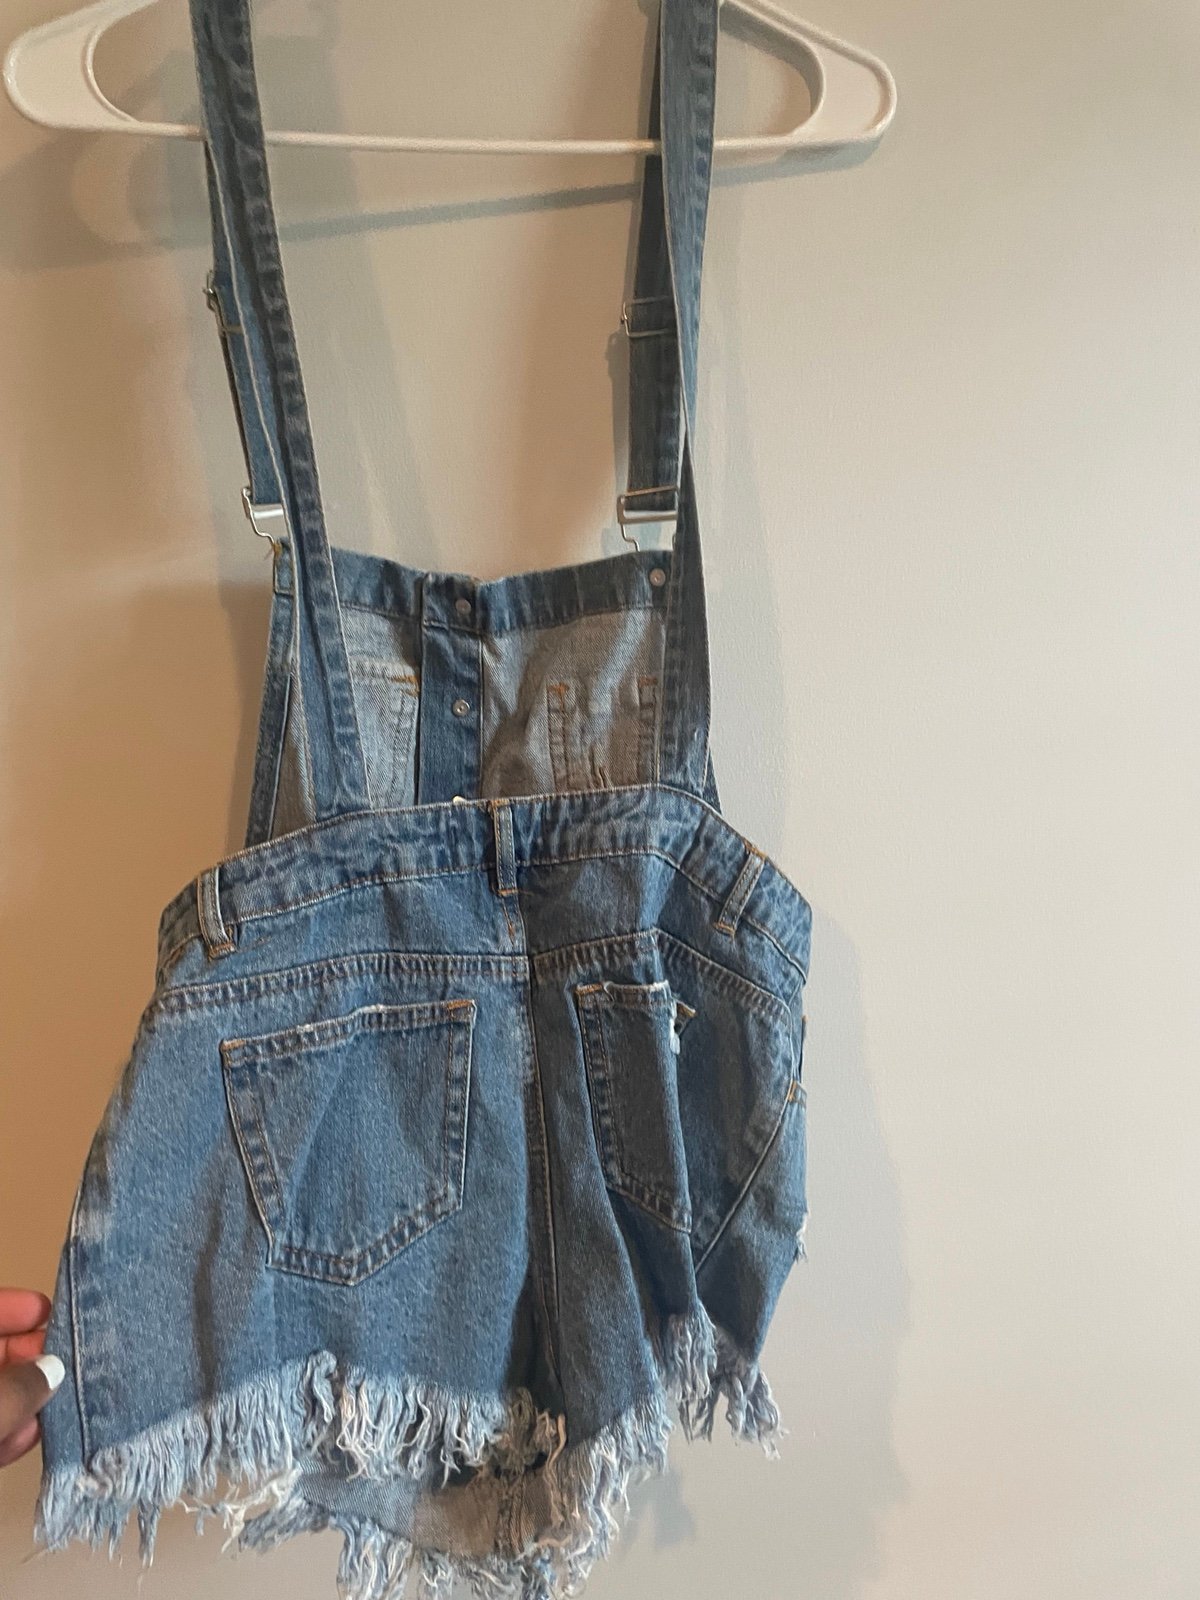 The Best Seller NWT Forever 21 Overalls PfPVYmT88 best sale